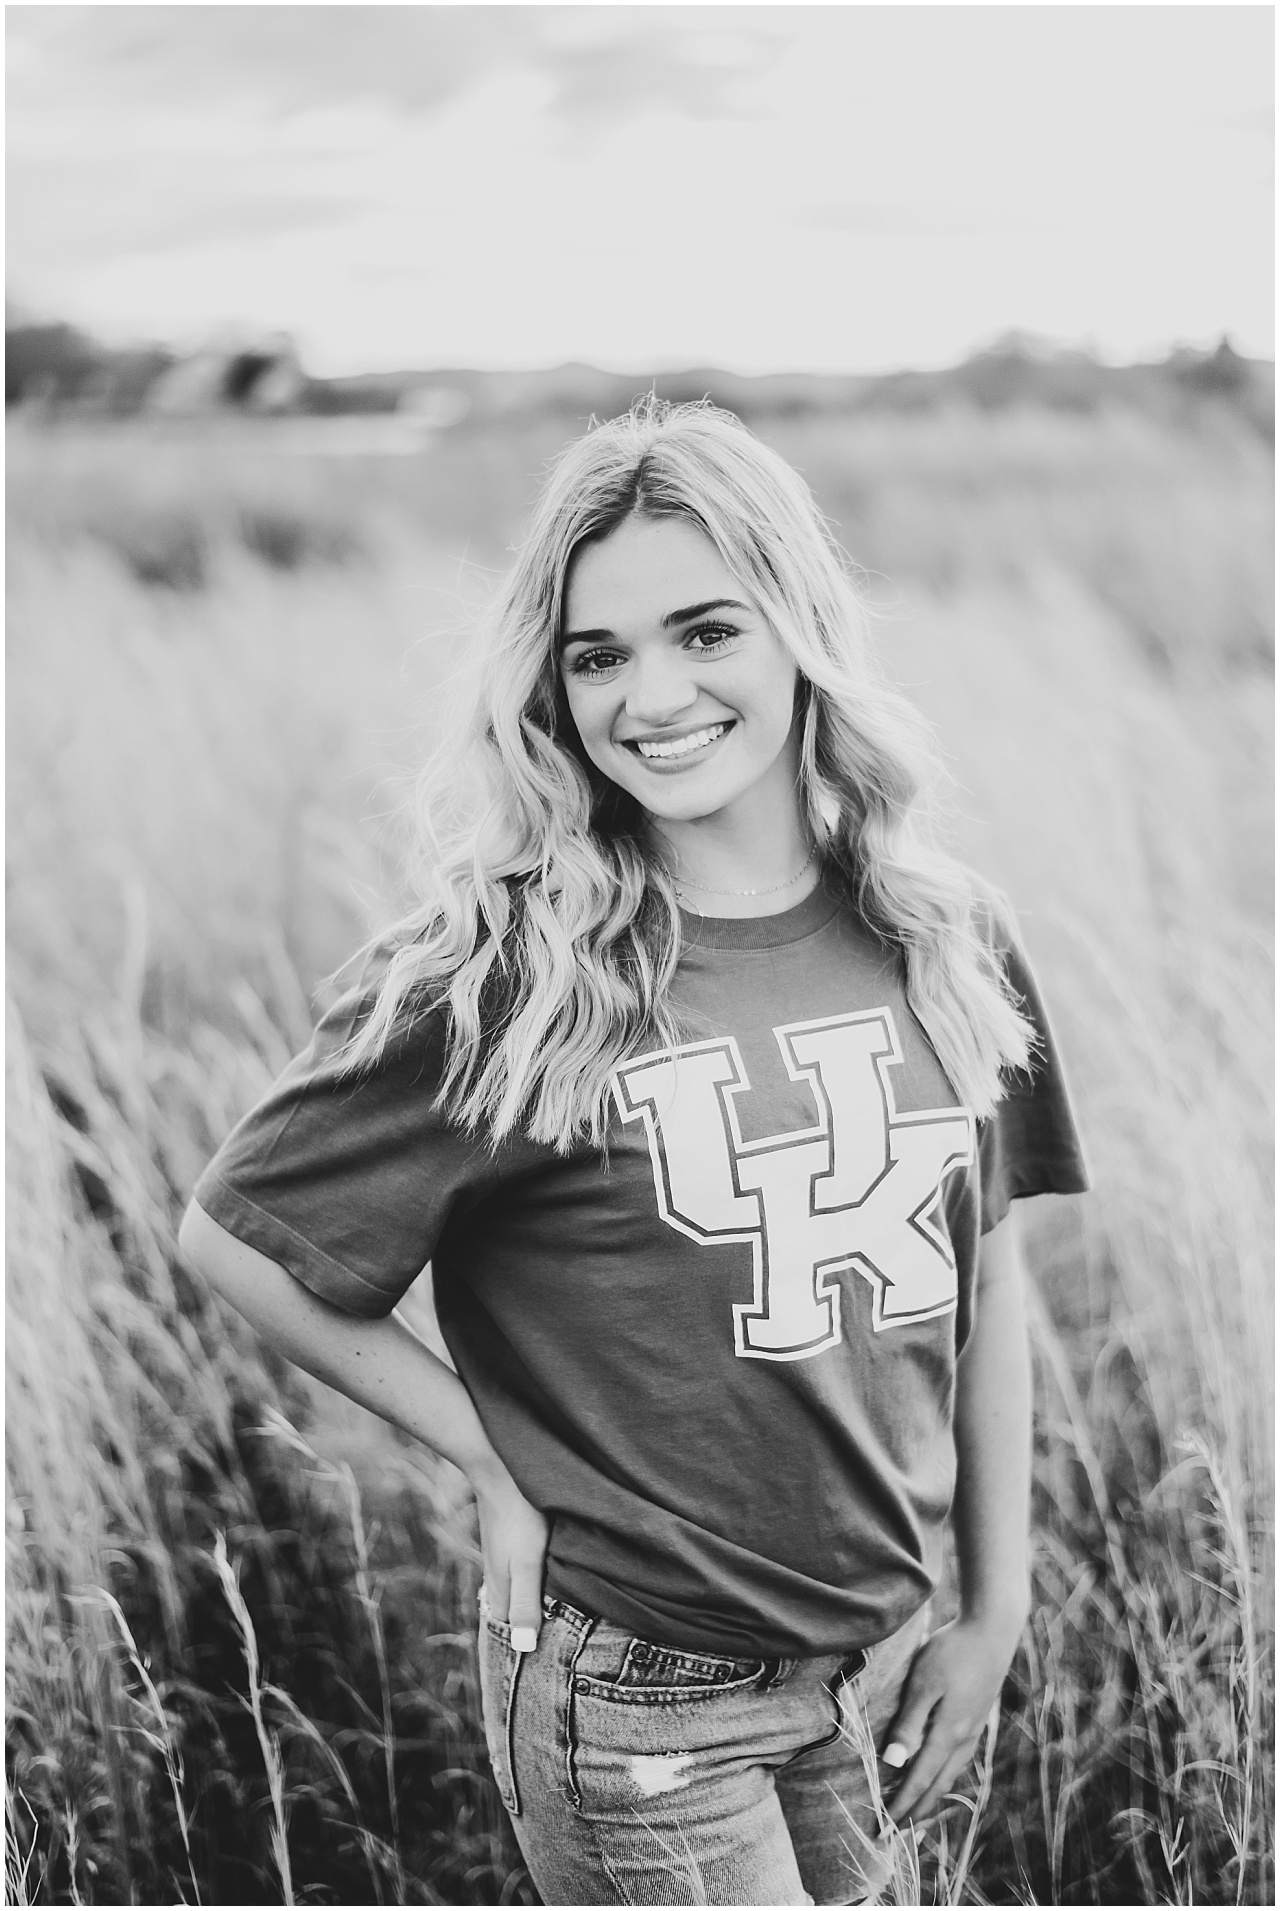 Black and white image of a blonde girl in a field wearing University of Kentucky tshirt and jeans and burkes.